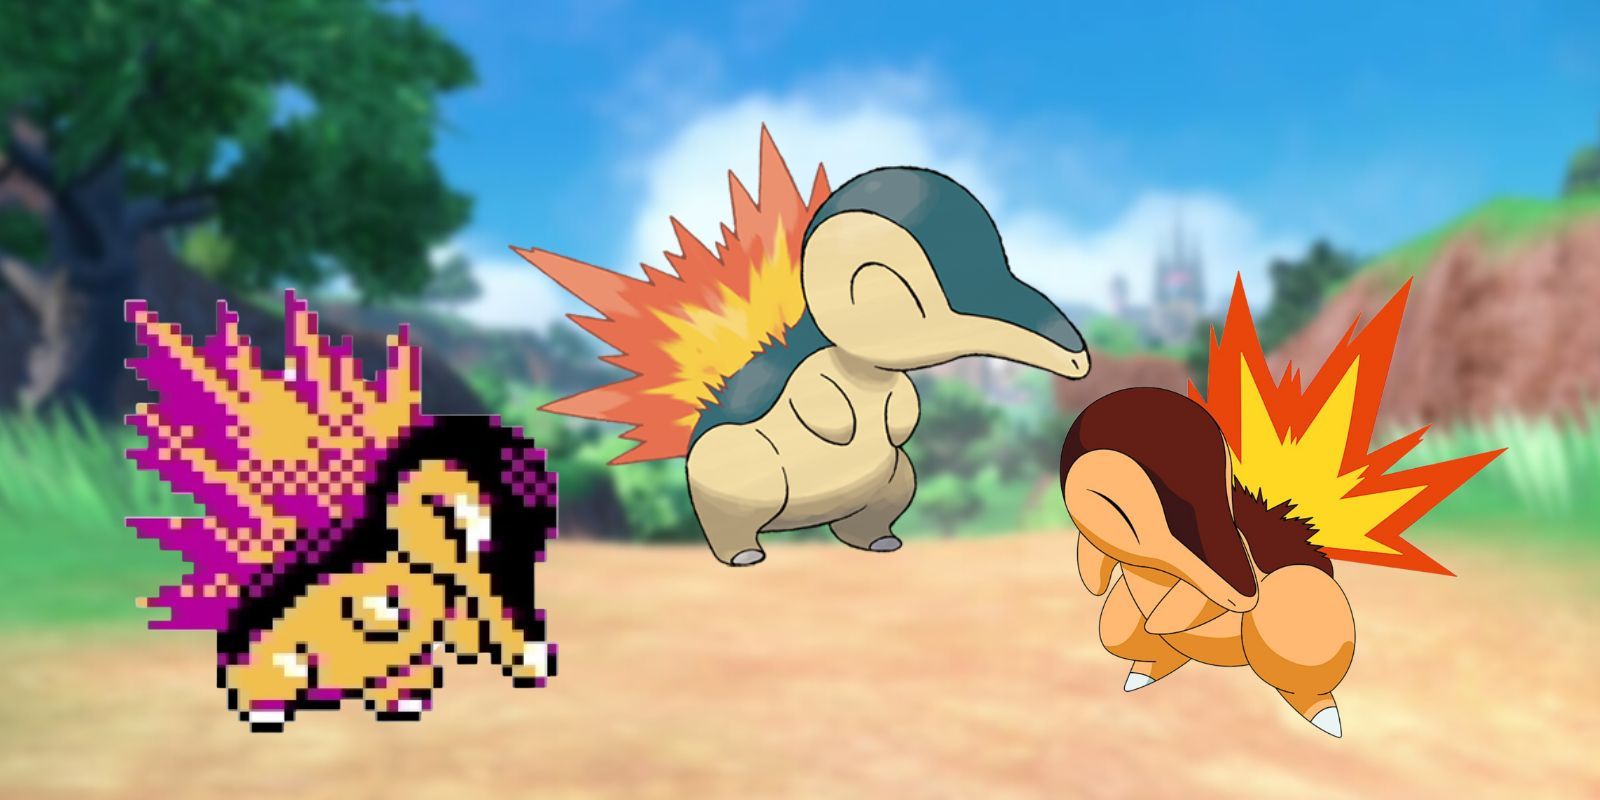 Normal Cyndaquil flanked by the Gen 2 shiny and the current shiny versions